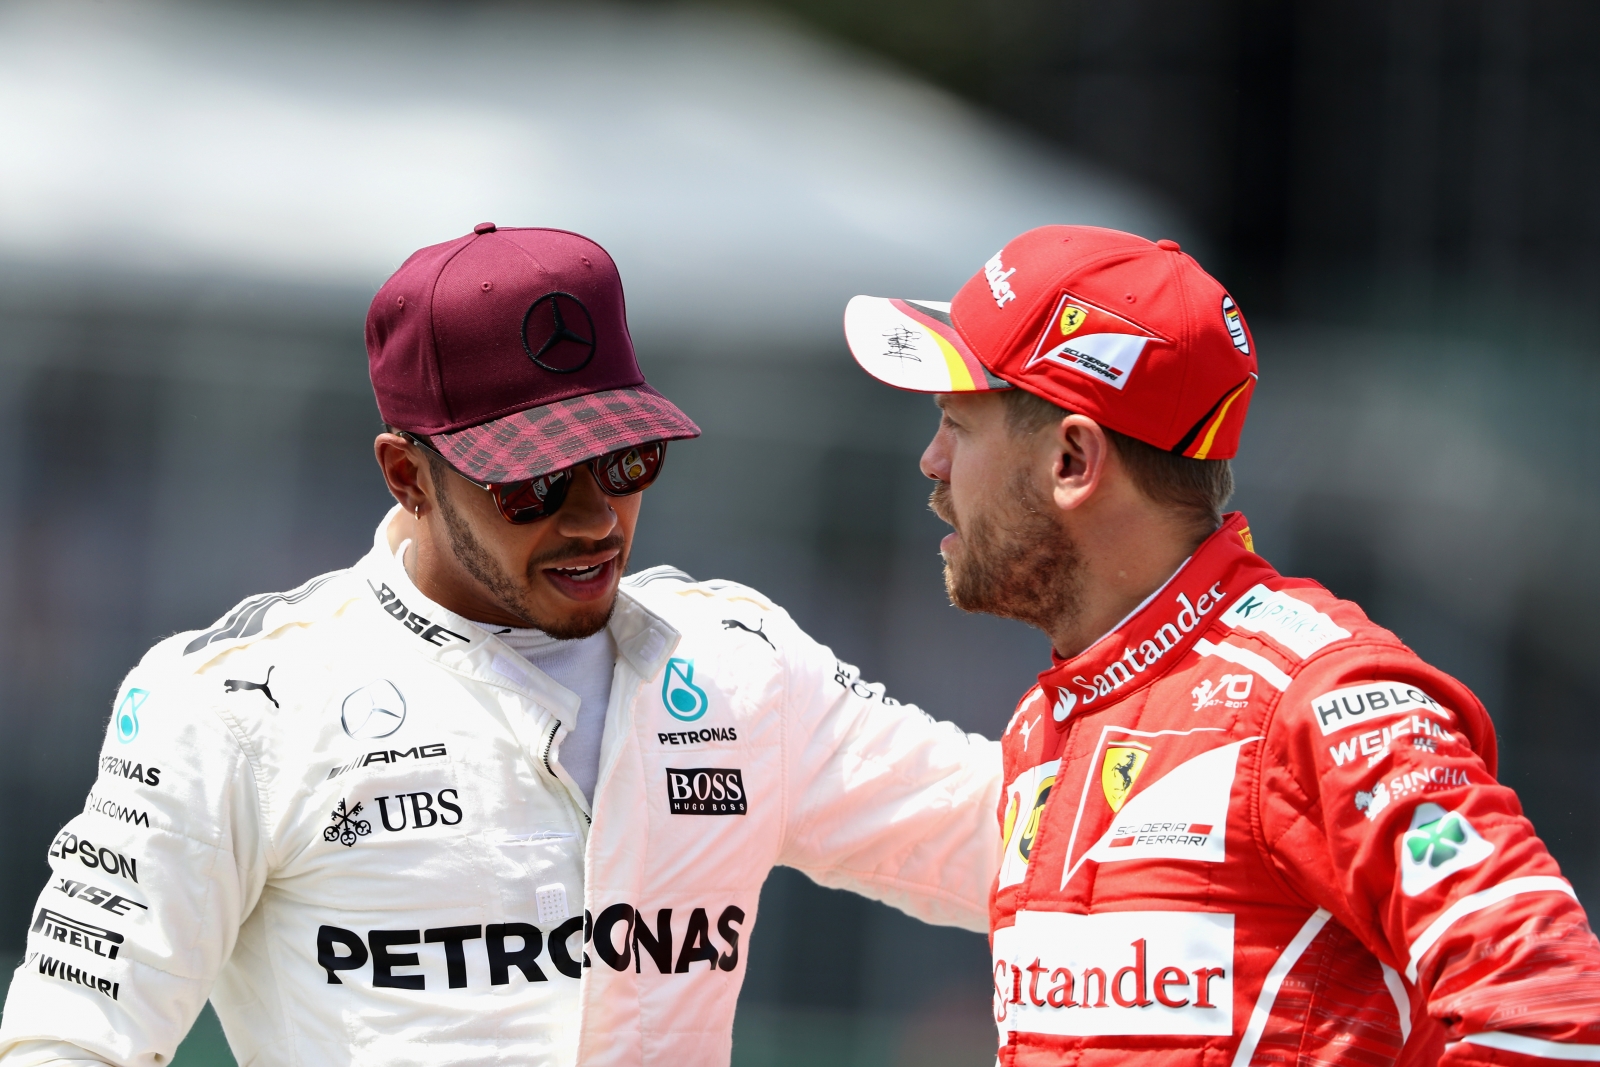 Could Lewis Hamilton one day drive for Ferrari? 'Who knows what the future holds'